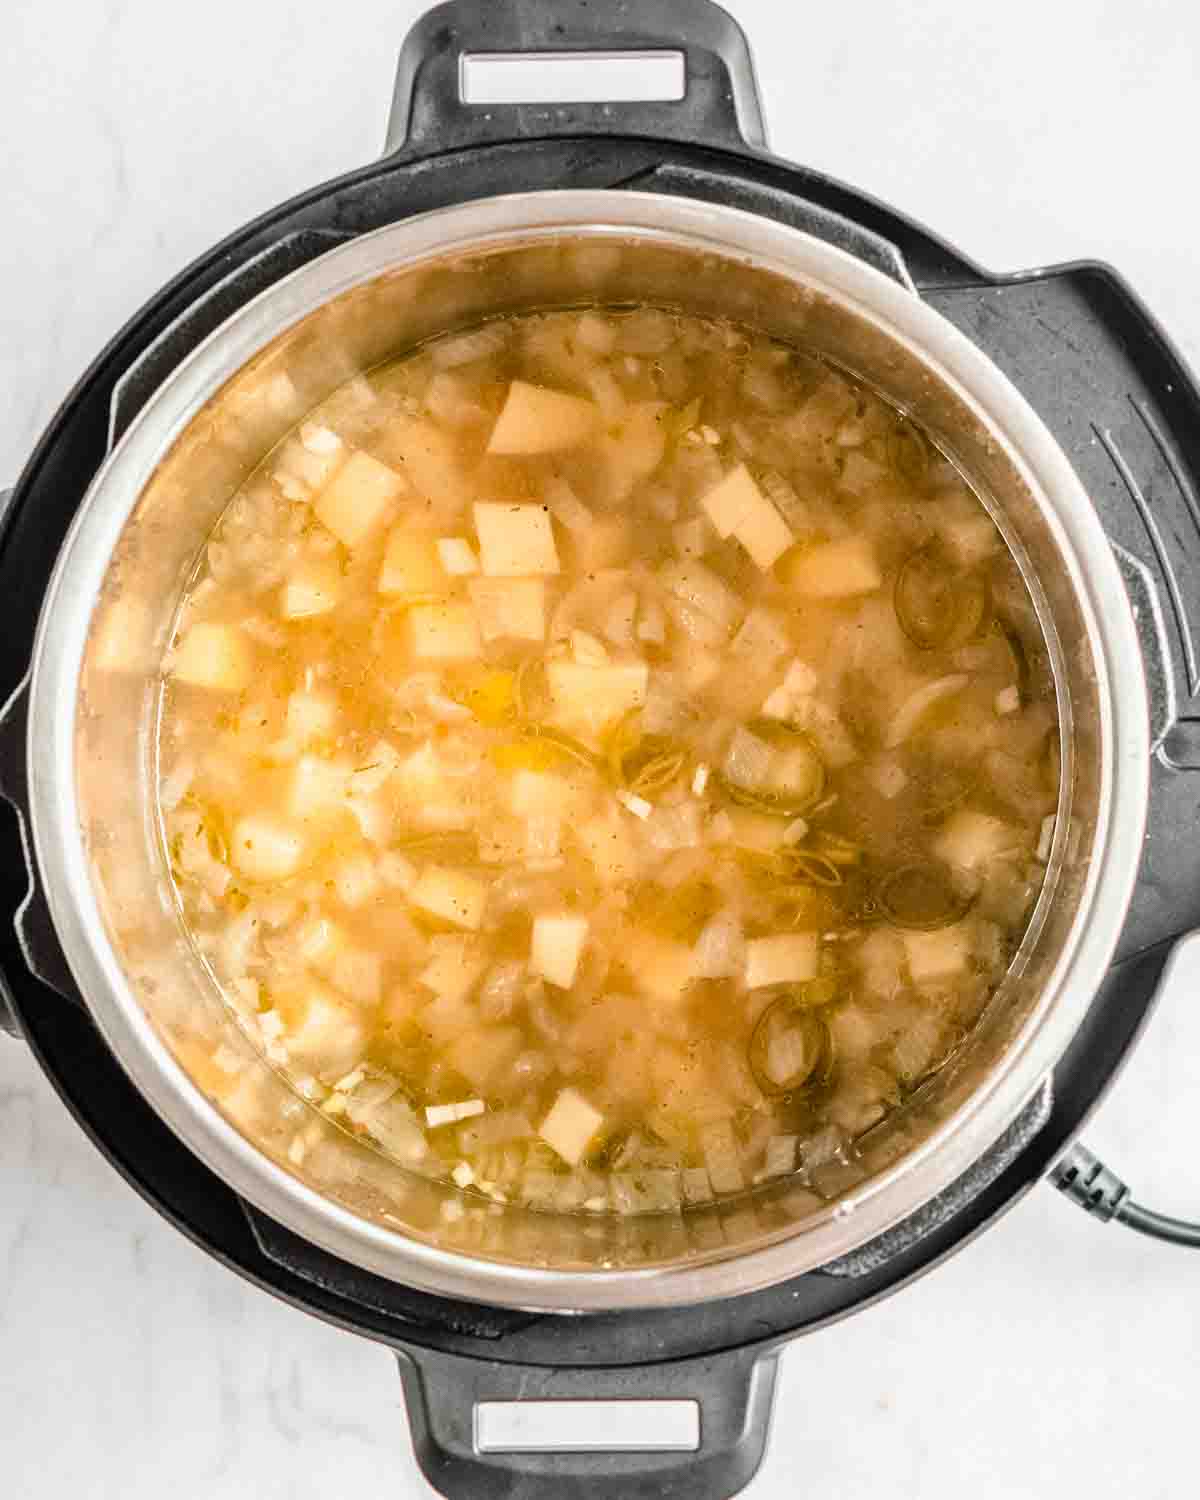 potato soup in the instant pot that has been cooked for 10 minutes on high pressure